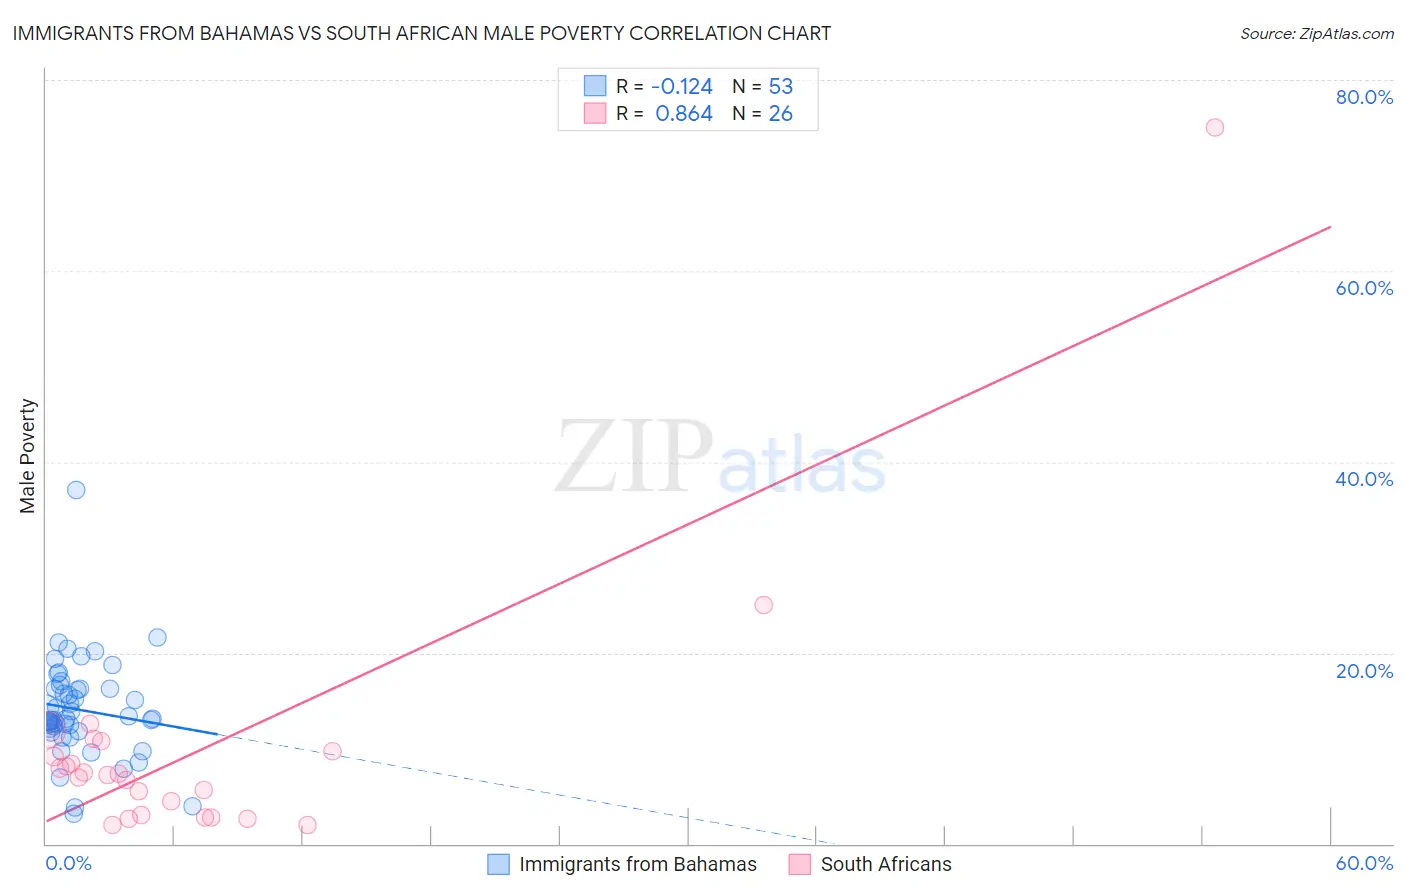 Immigrants from Bahamas vs South African Male Poverty